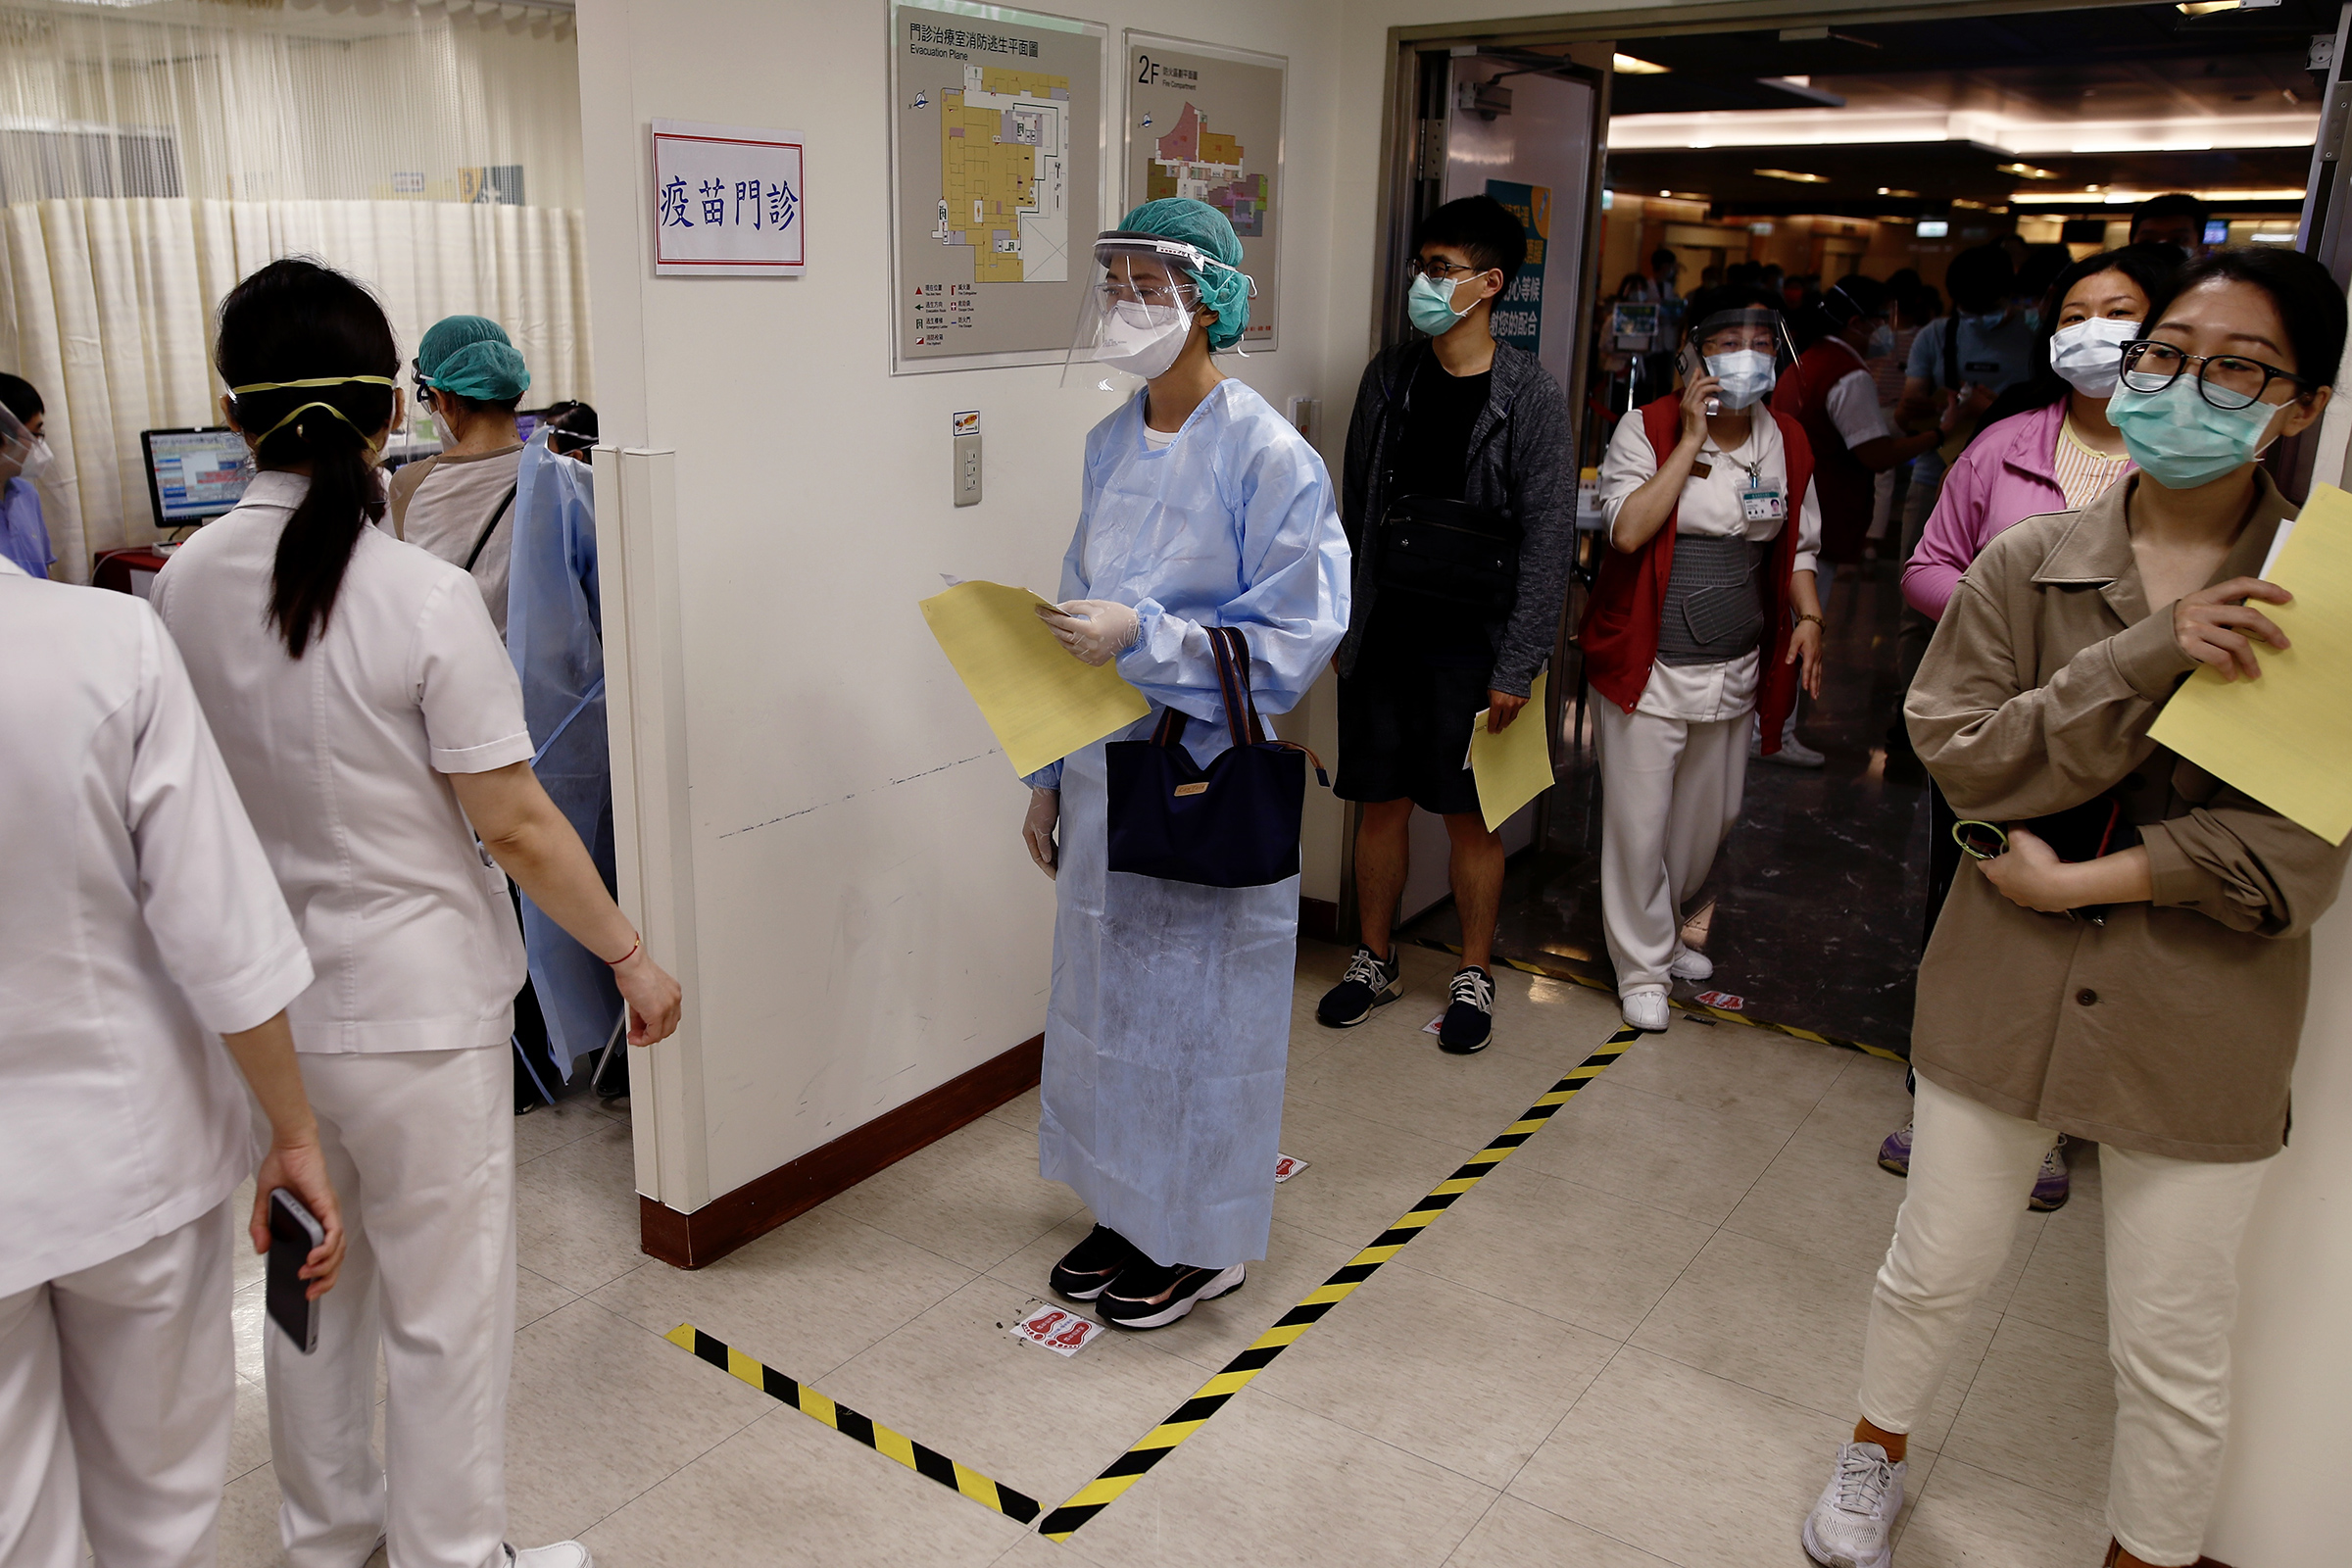 Medical workers wait to receive the AstraZeneca COVID-19 vaccine at a hospital in New Taipei on May 20. Hundreds of frontline workers received the vaccine amid the rising number of cases in Taiwan. (Ritchie B. Tongo—EPA-EFE/Shutterstock)